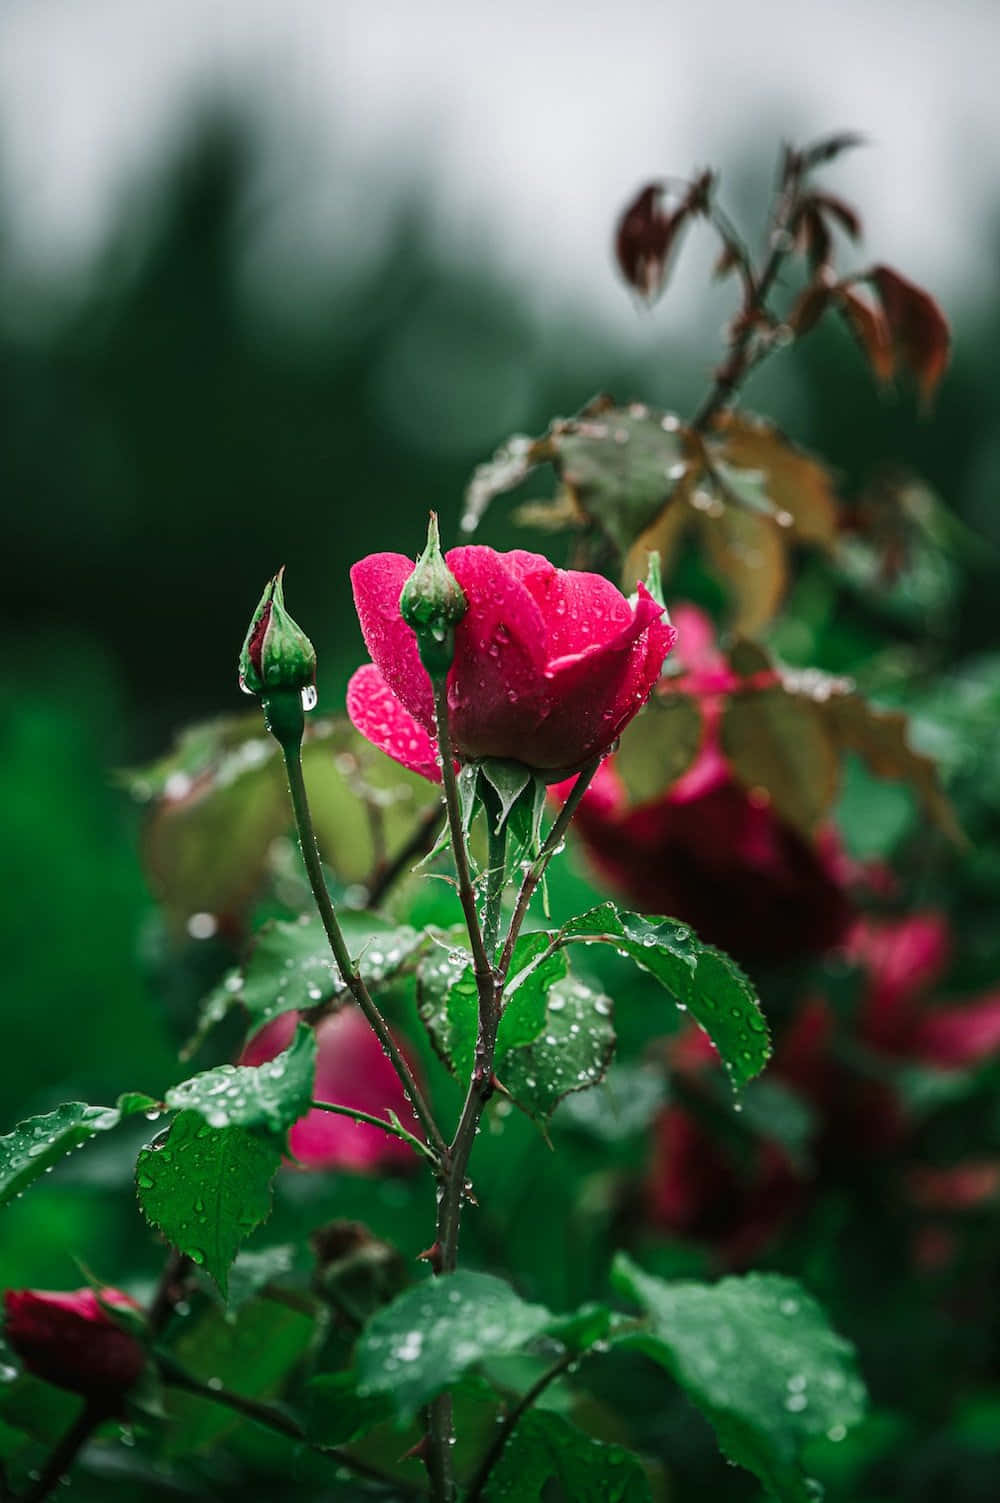 A vibrant rose kissed by rain Wallpaper